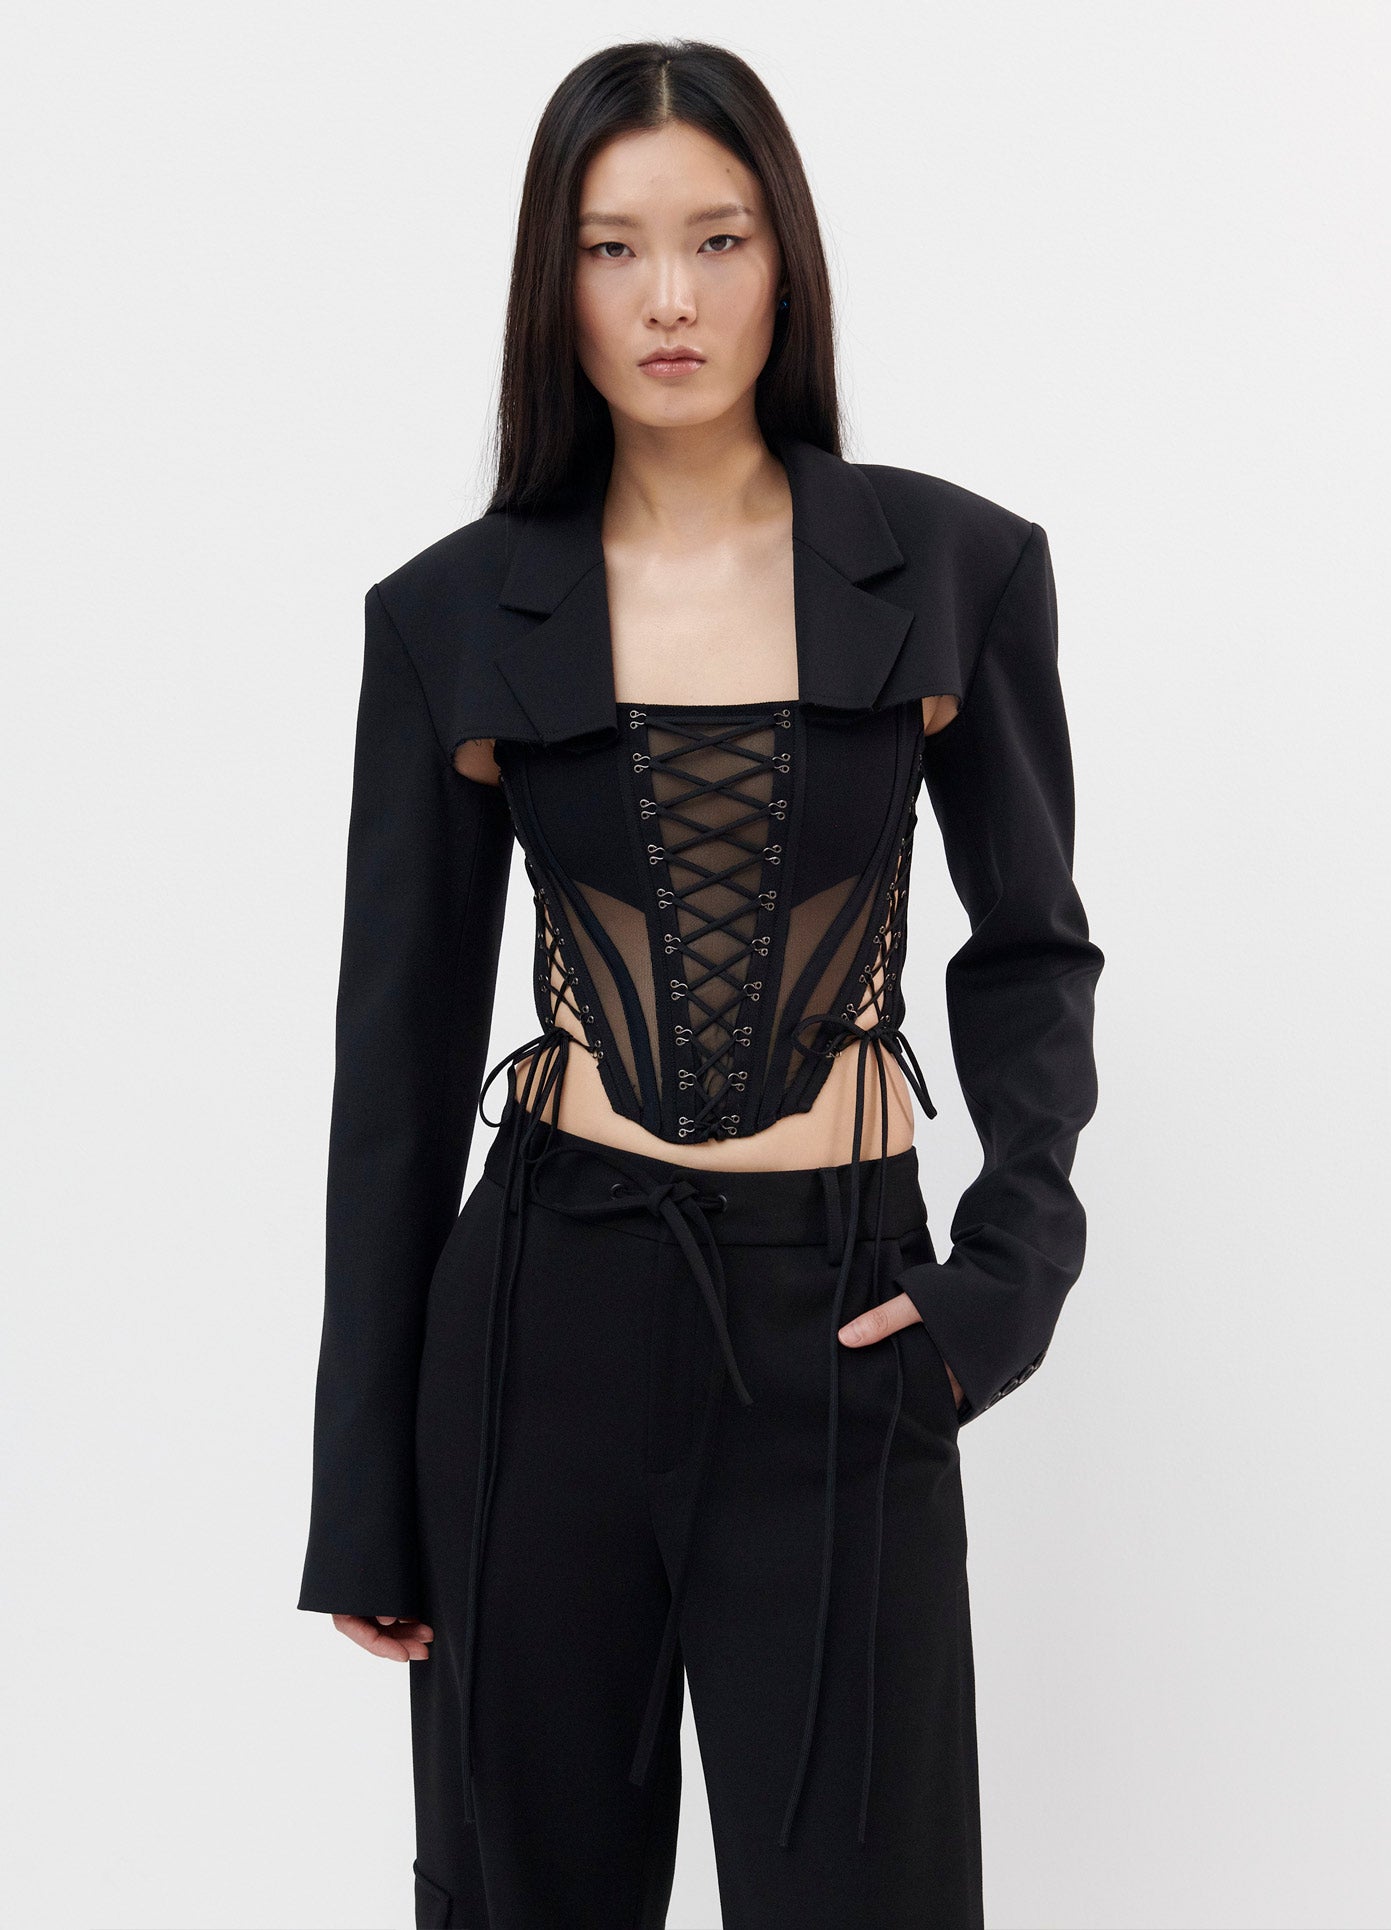 MONSE Laced Bustier in Black on Model Wearing Jacket Front View